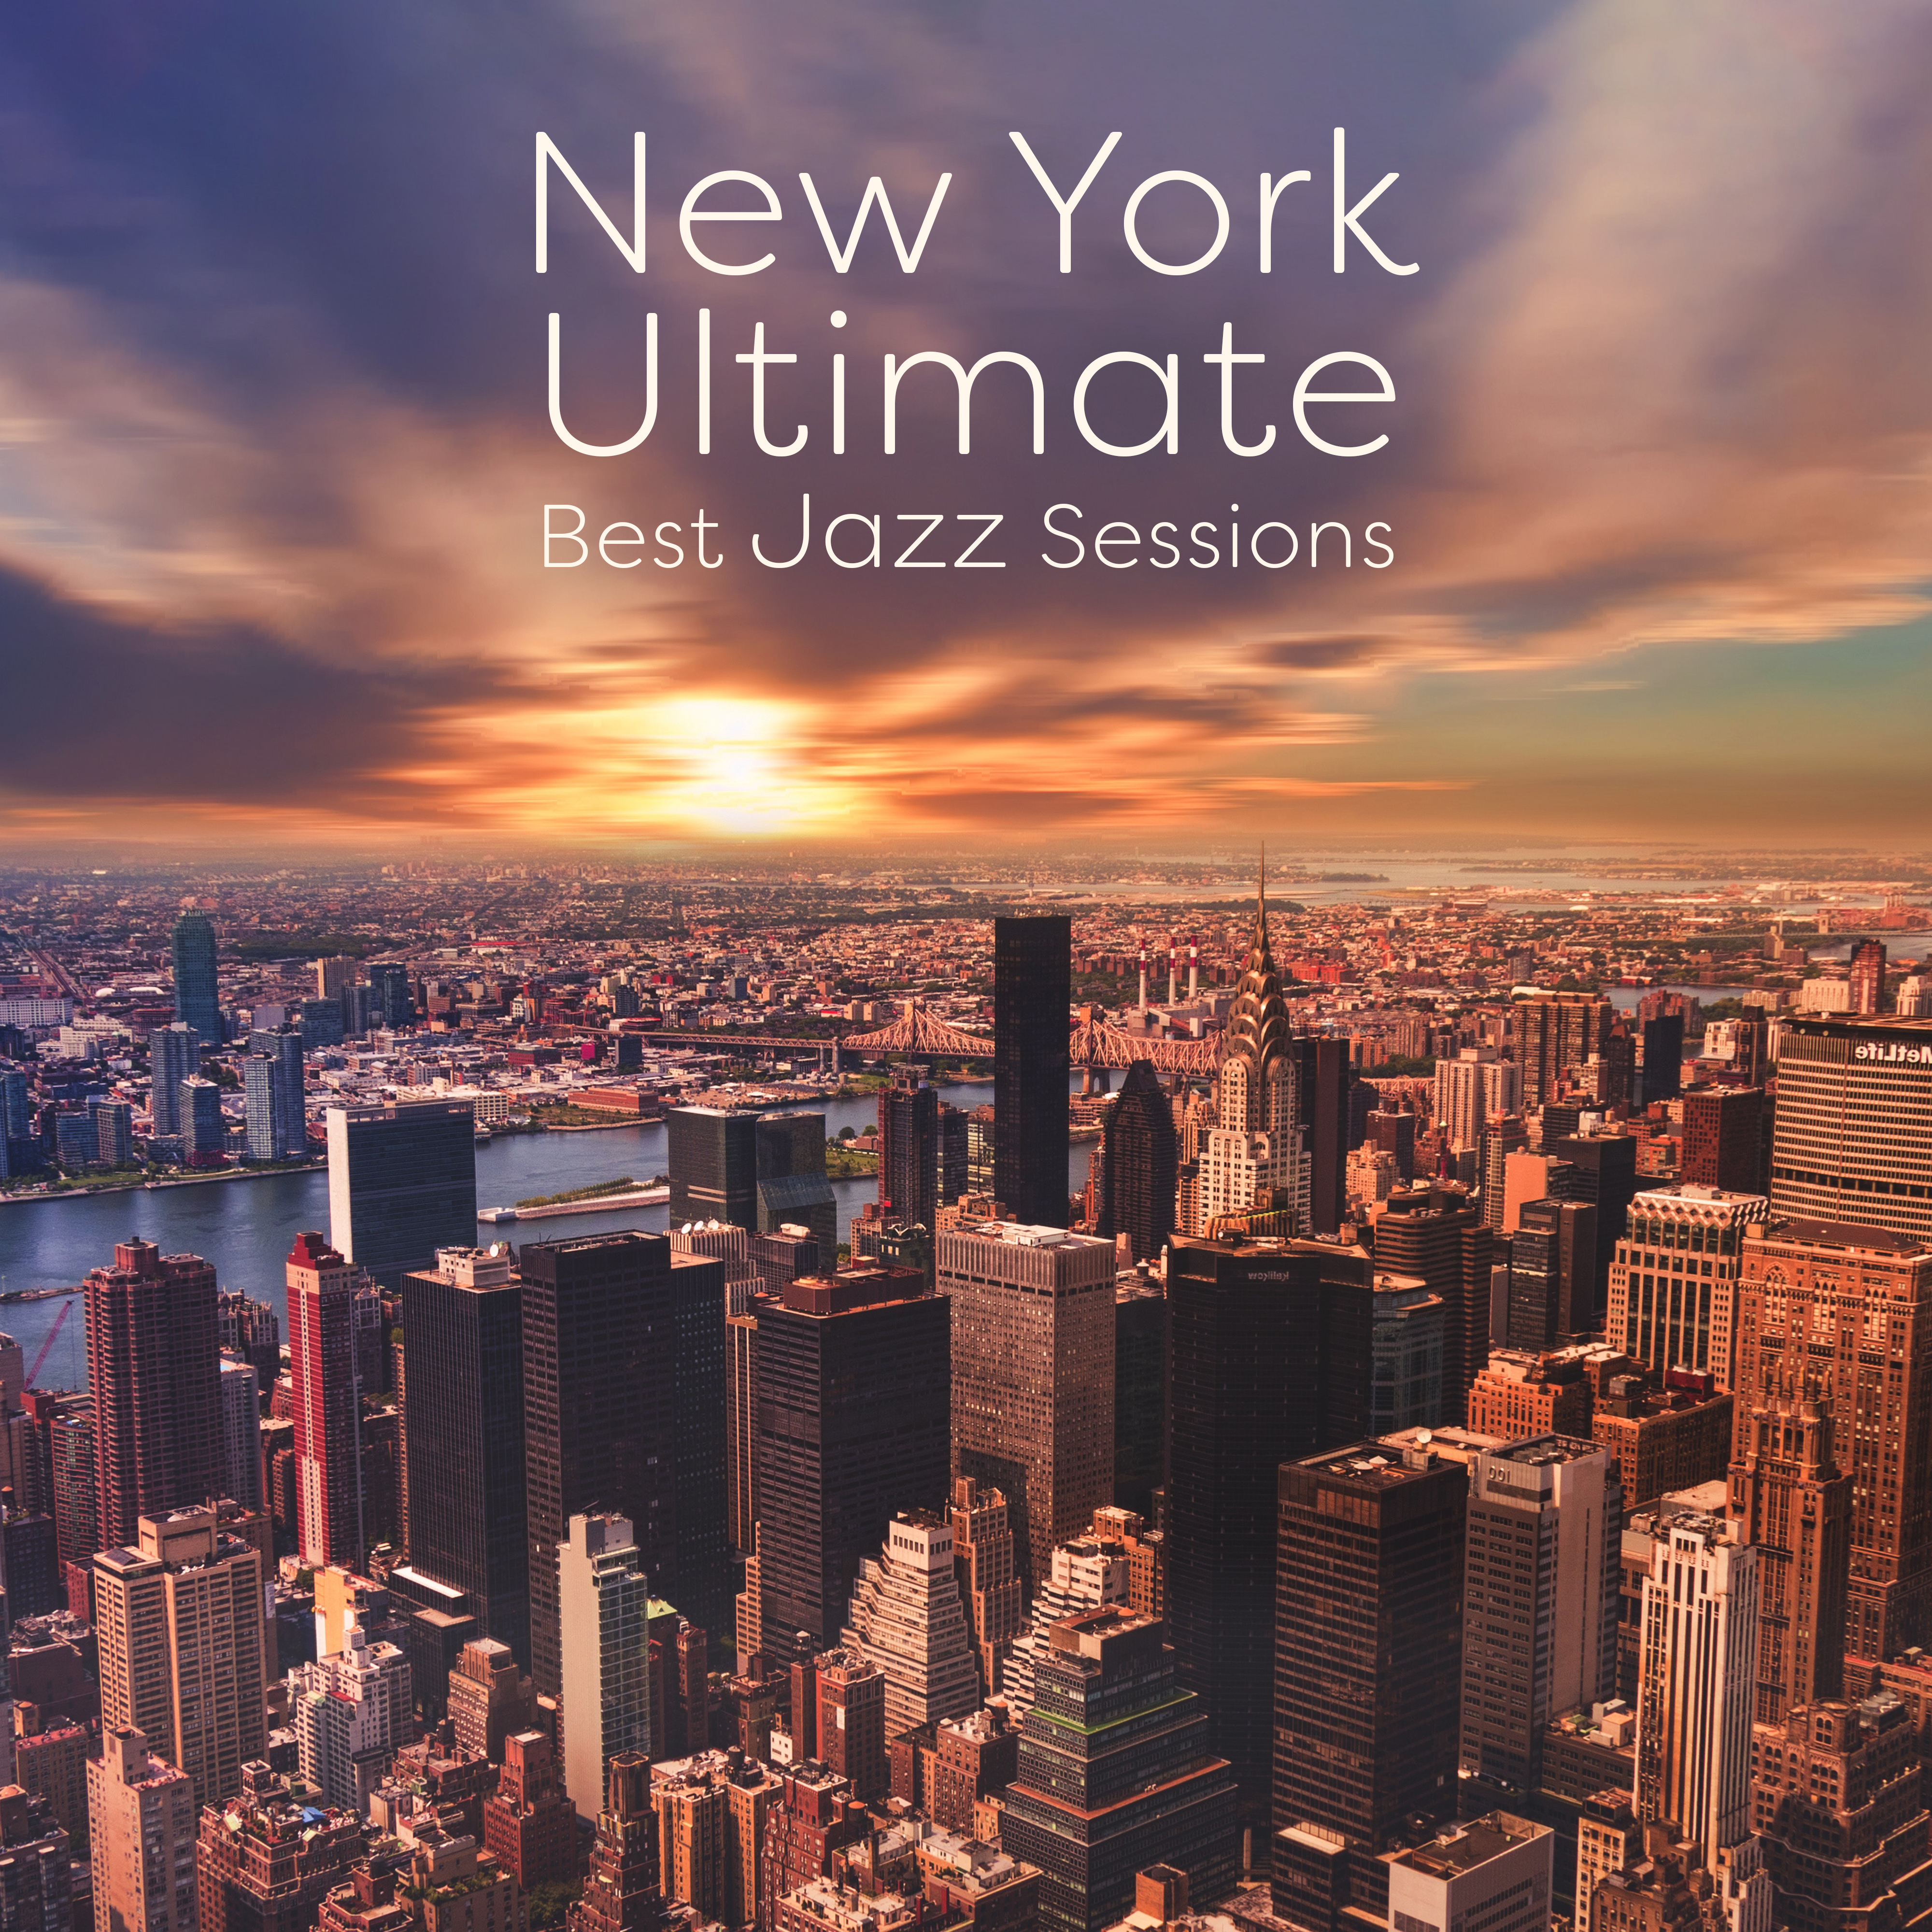 New York Ultimate Club: Best Jazz Sessions